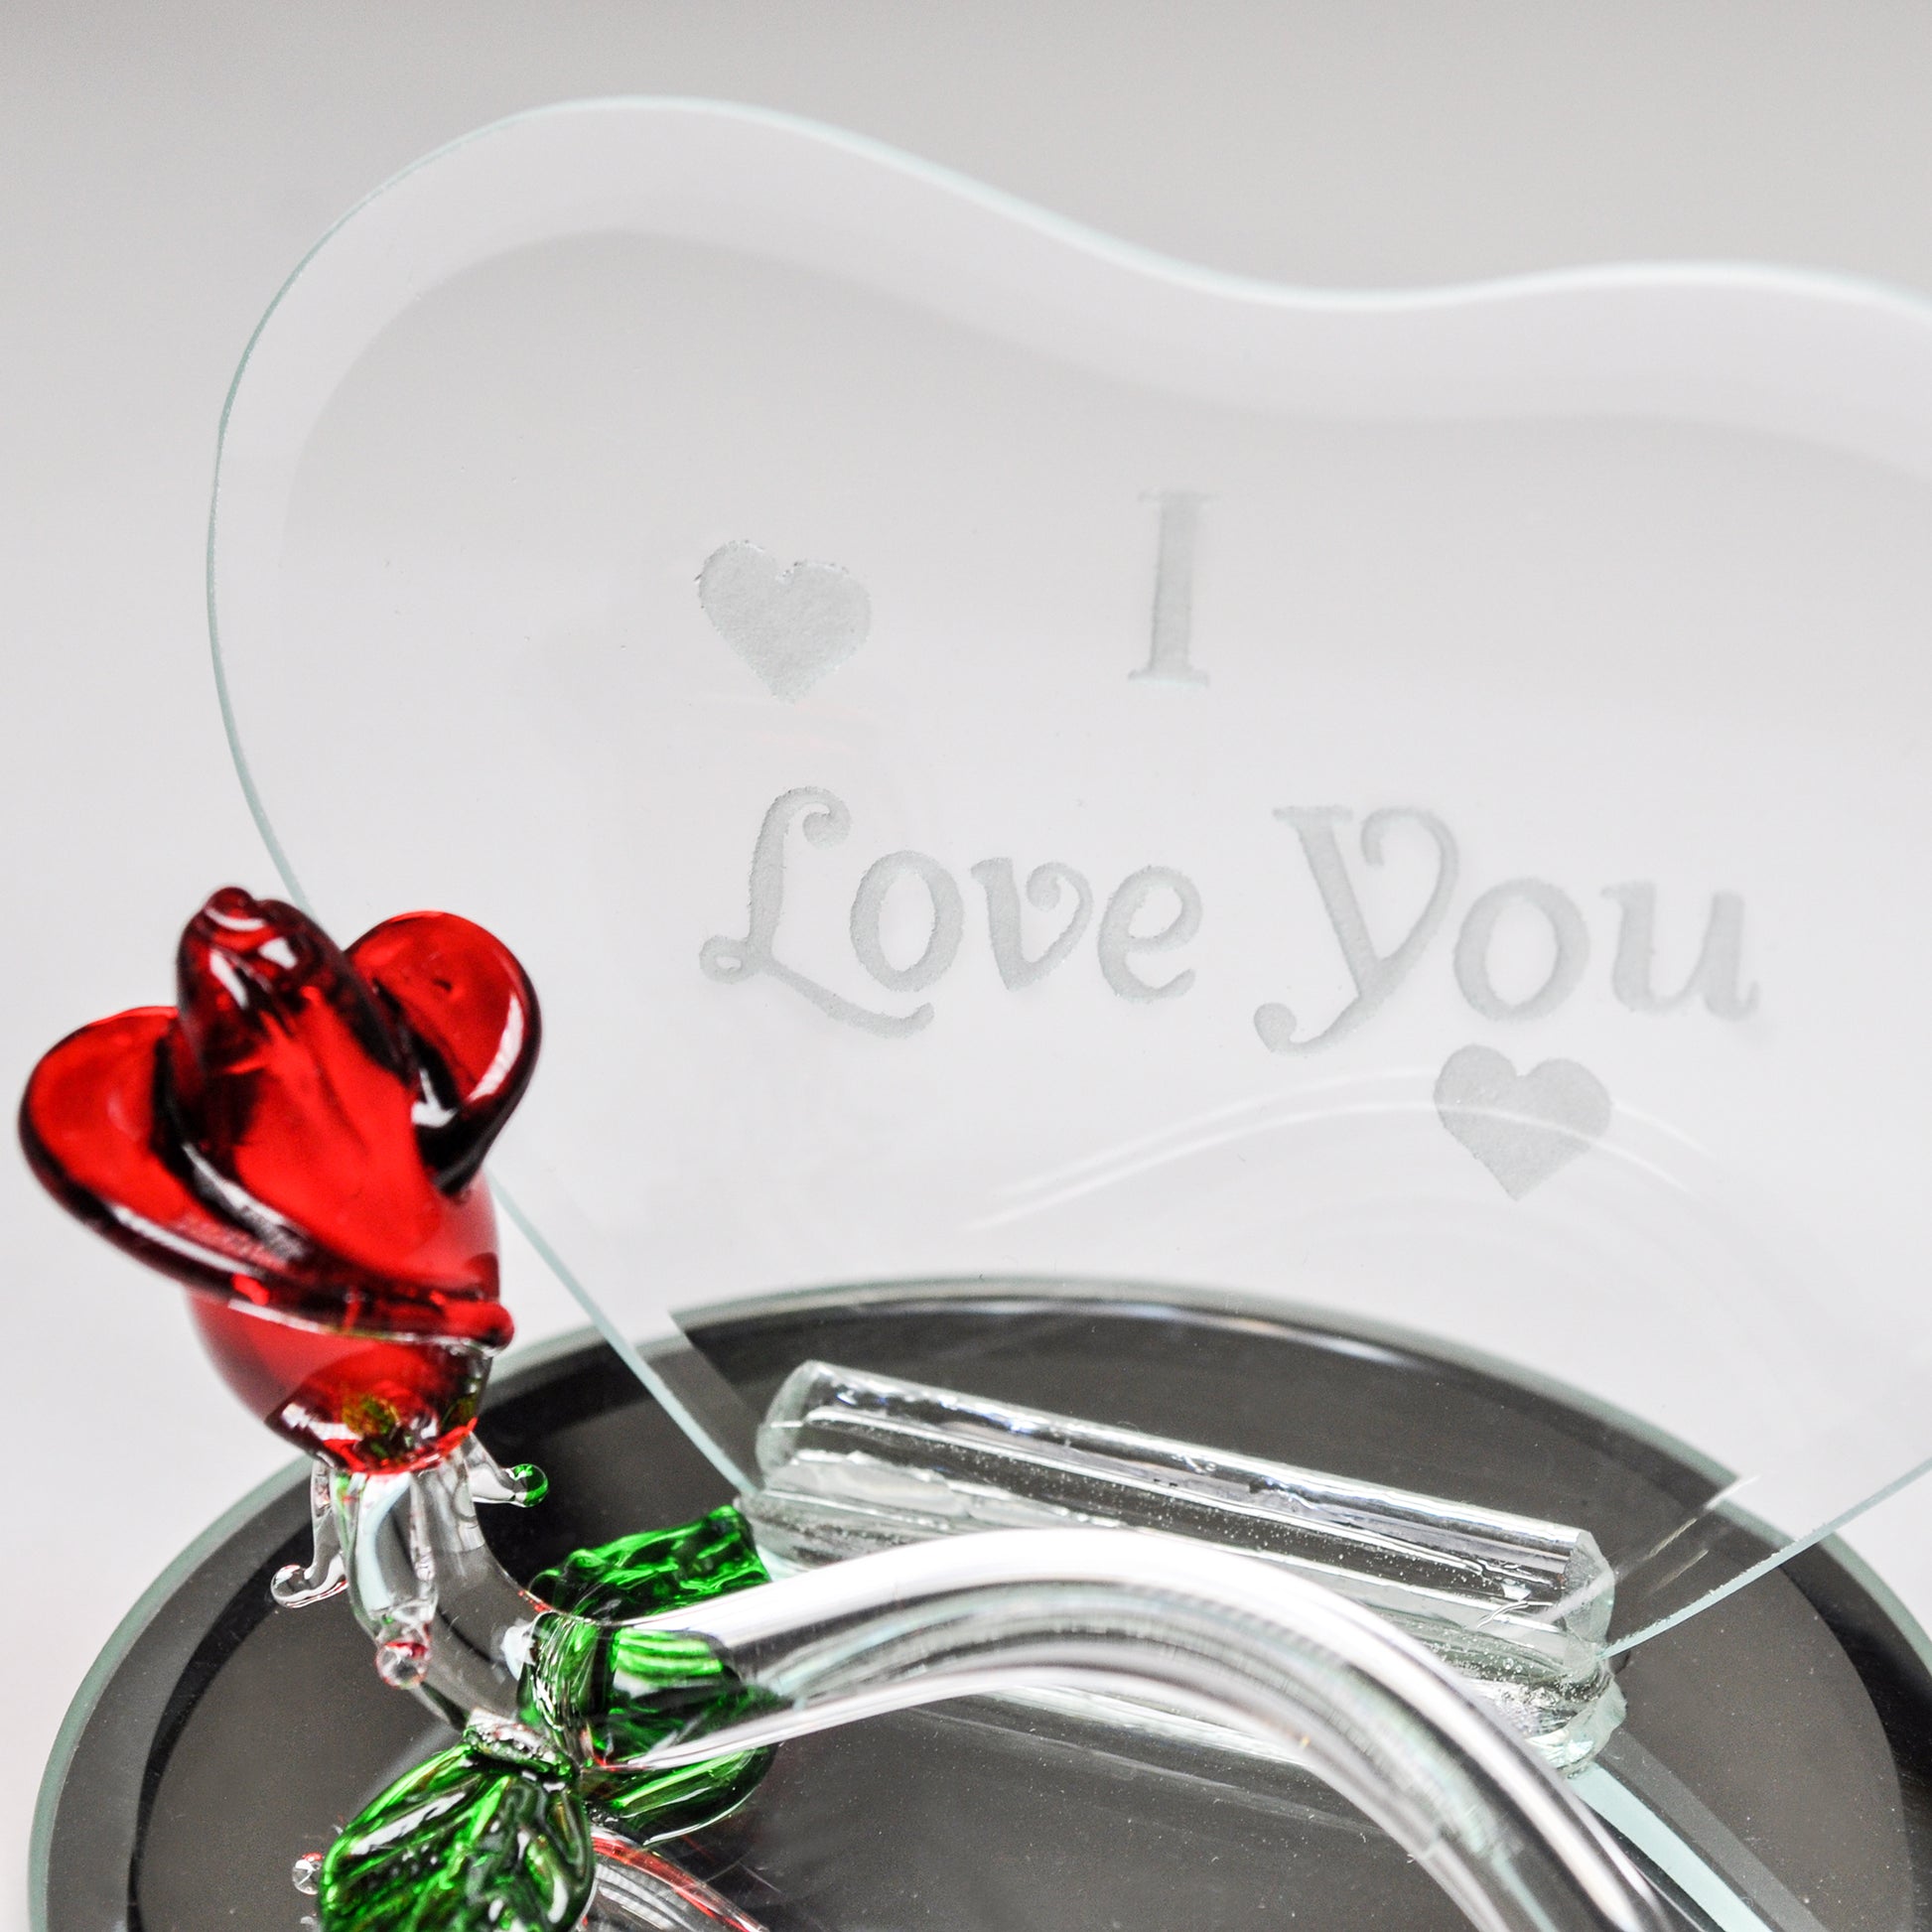 Crystal Castle Heart Shaped Glass plaque with glass rose and mirror base. The words " I love you" are engraved on the glass heart. Close up of red and green glass rose.